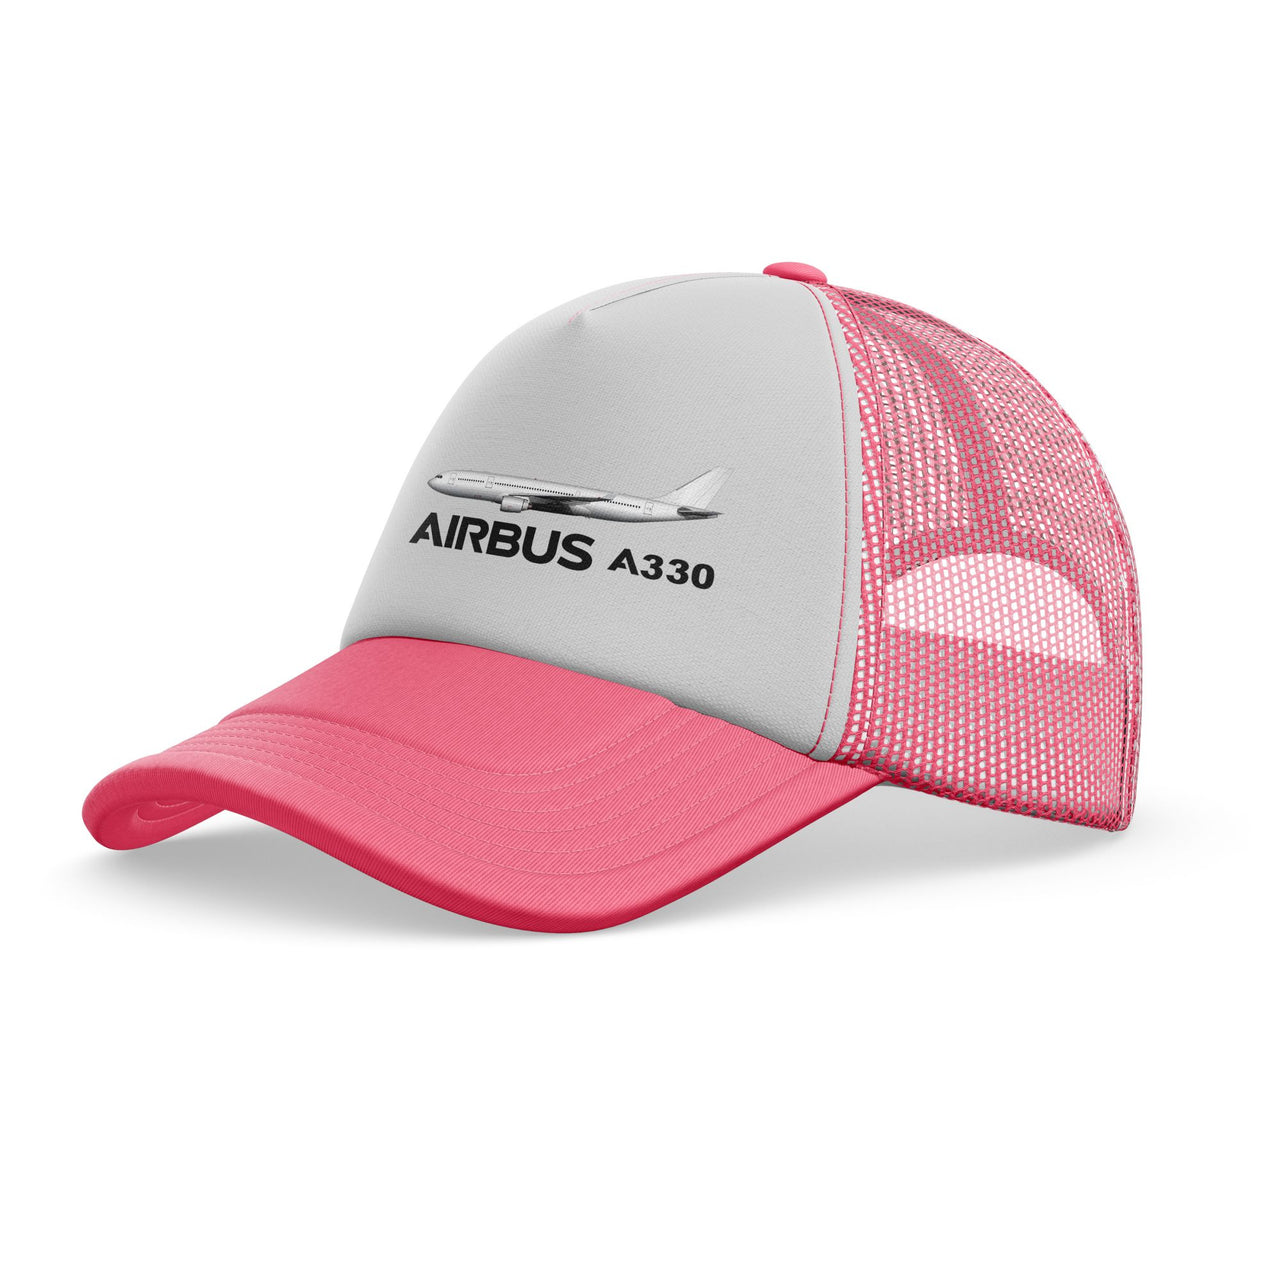 The Airbus A330 Designed Trucker Caps & Hats